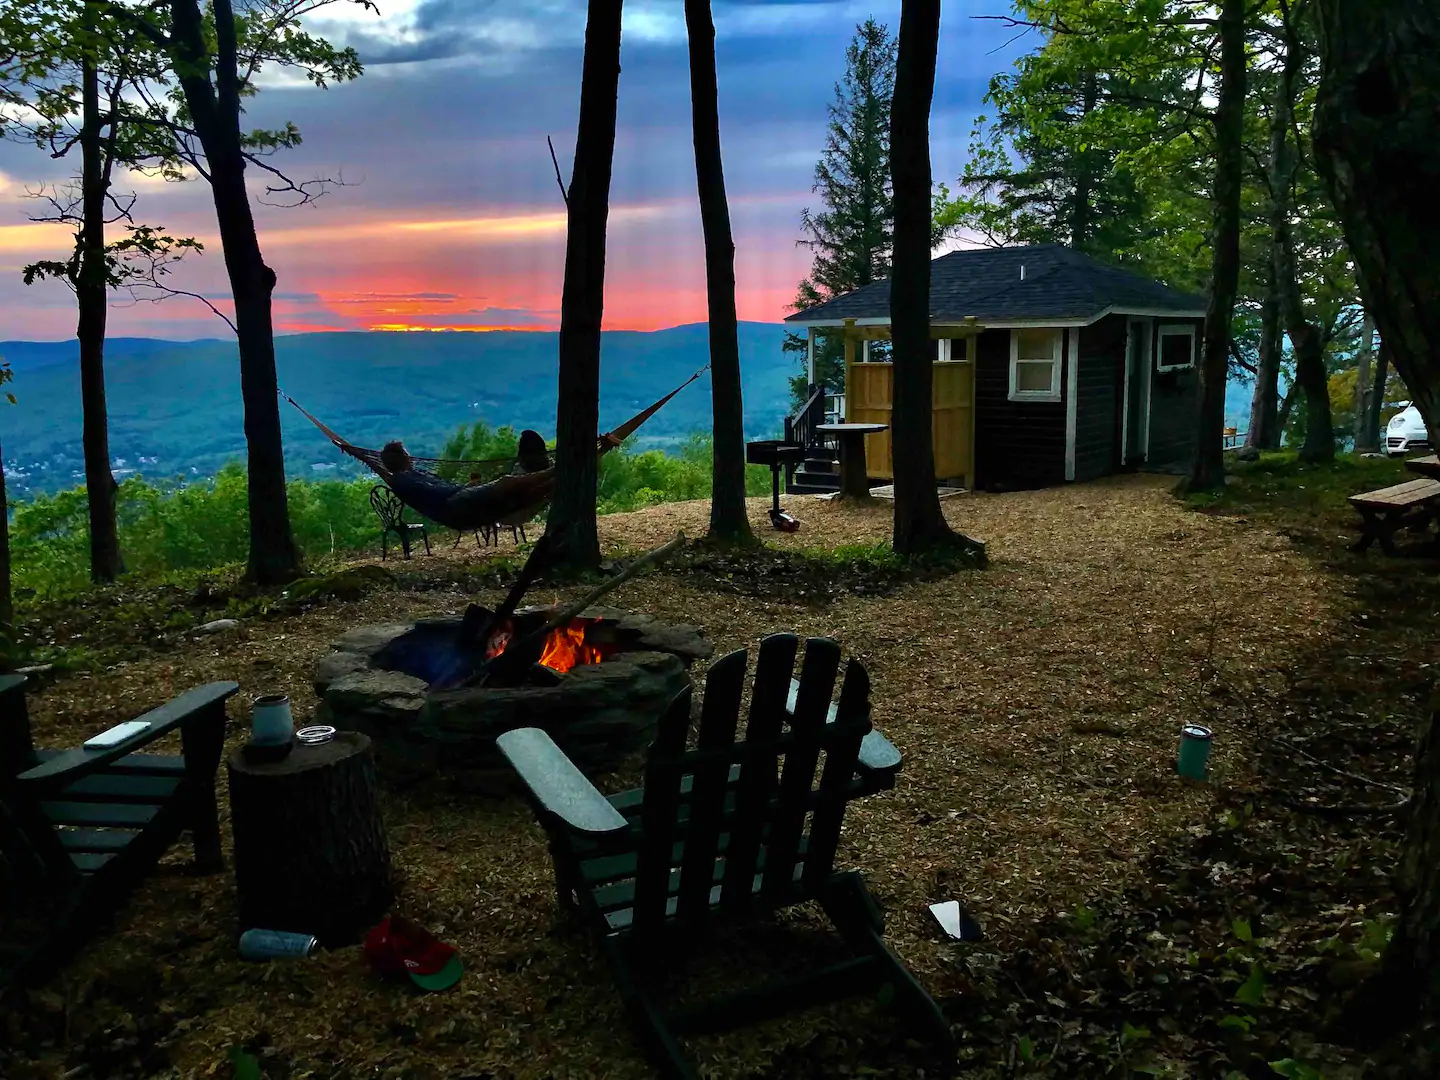 In the distance, there\'s a sunset sky with orange and hues of purple. In the foreground, chairs are set up around a crackling fire. A person is relaxing in a hammock by a small brown cabin.